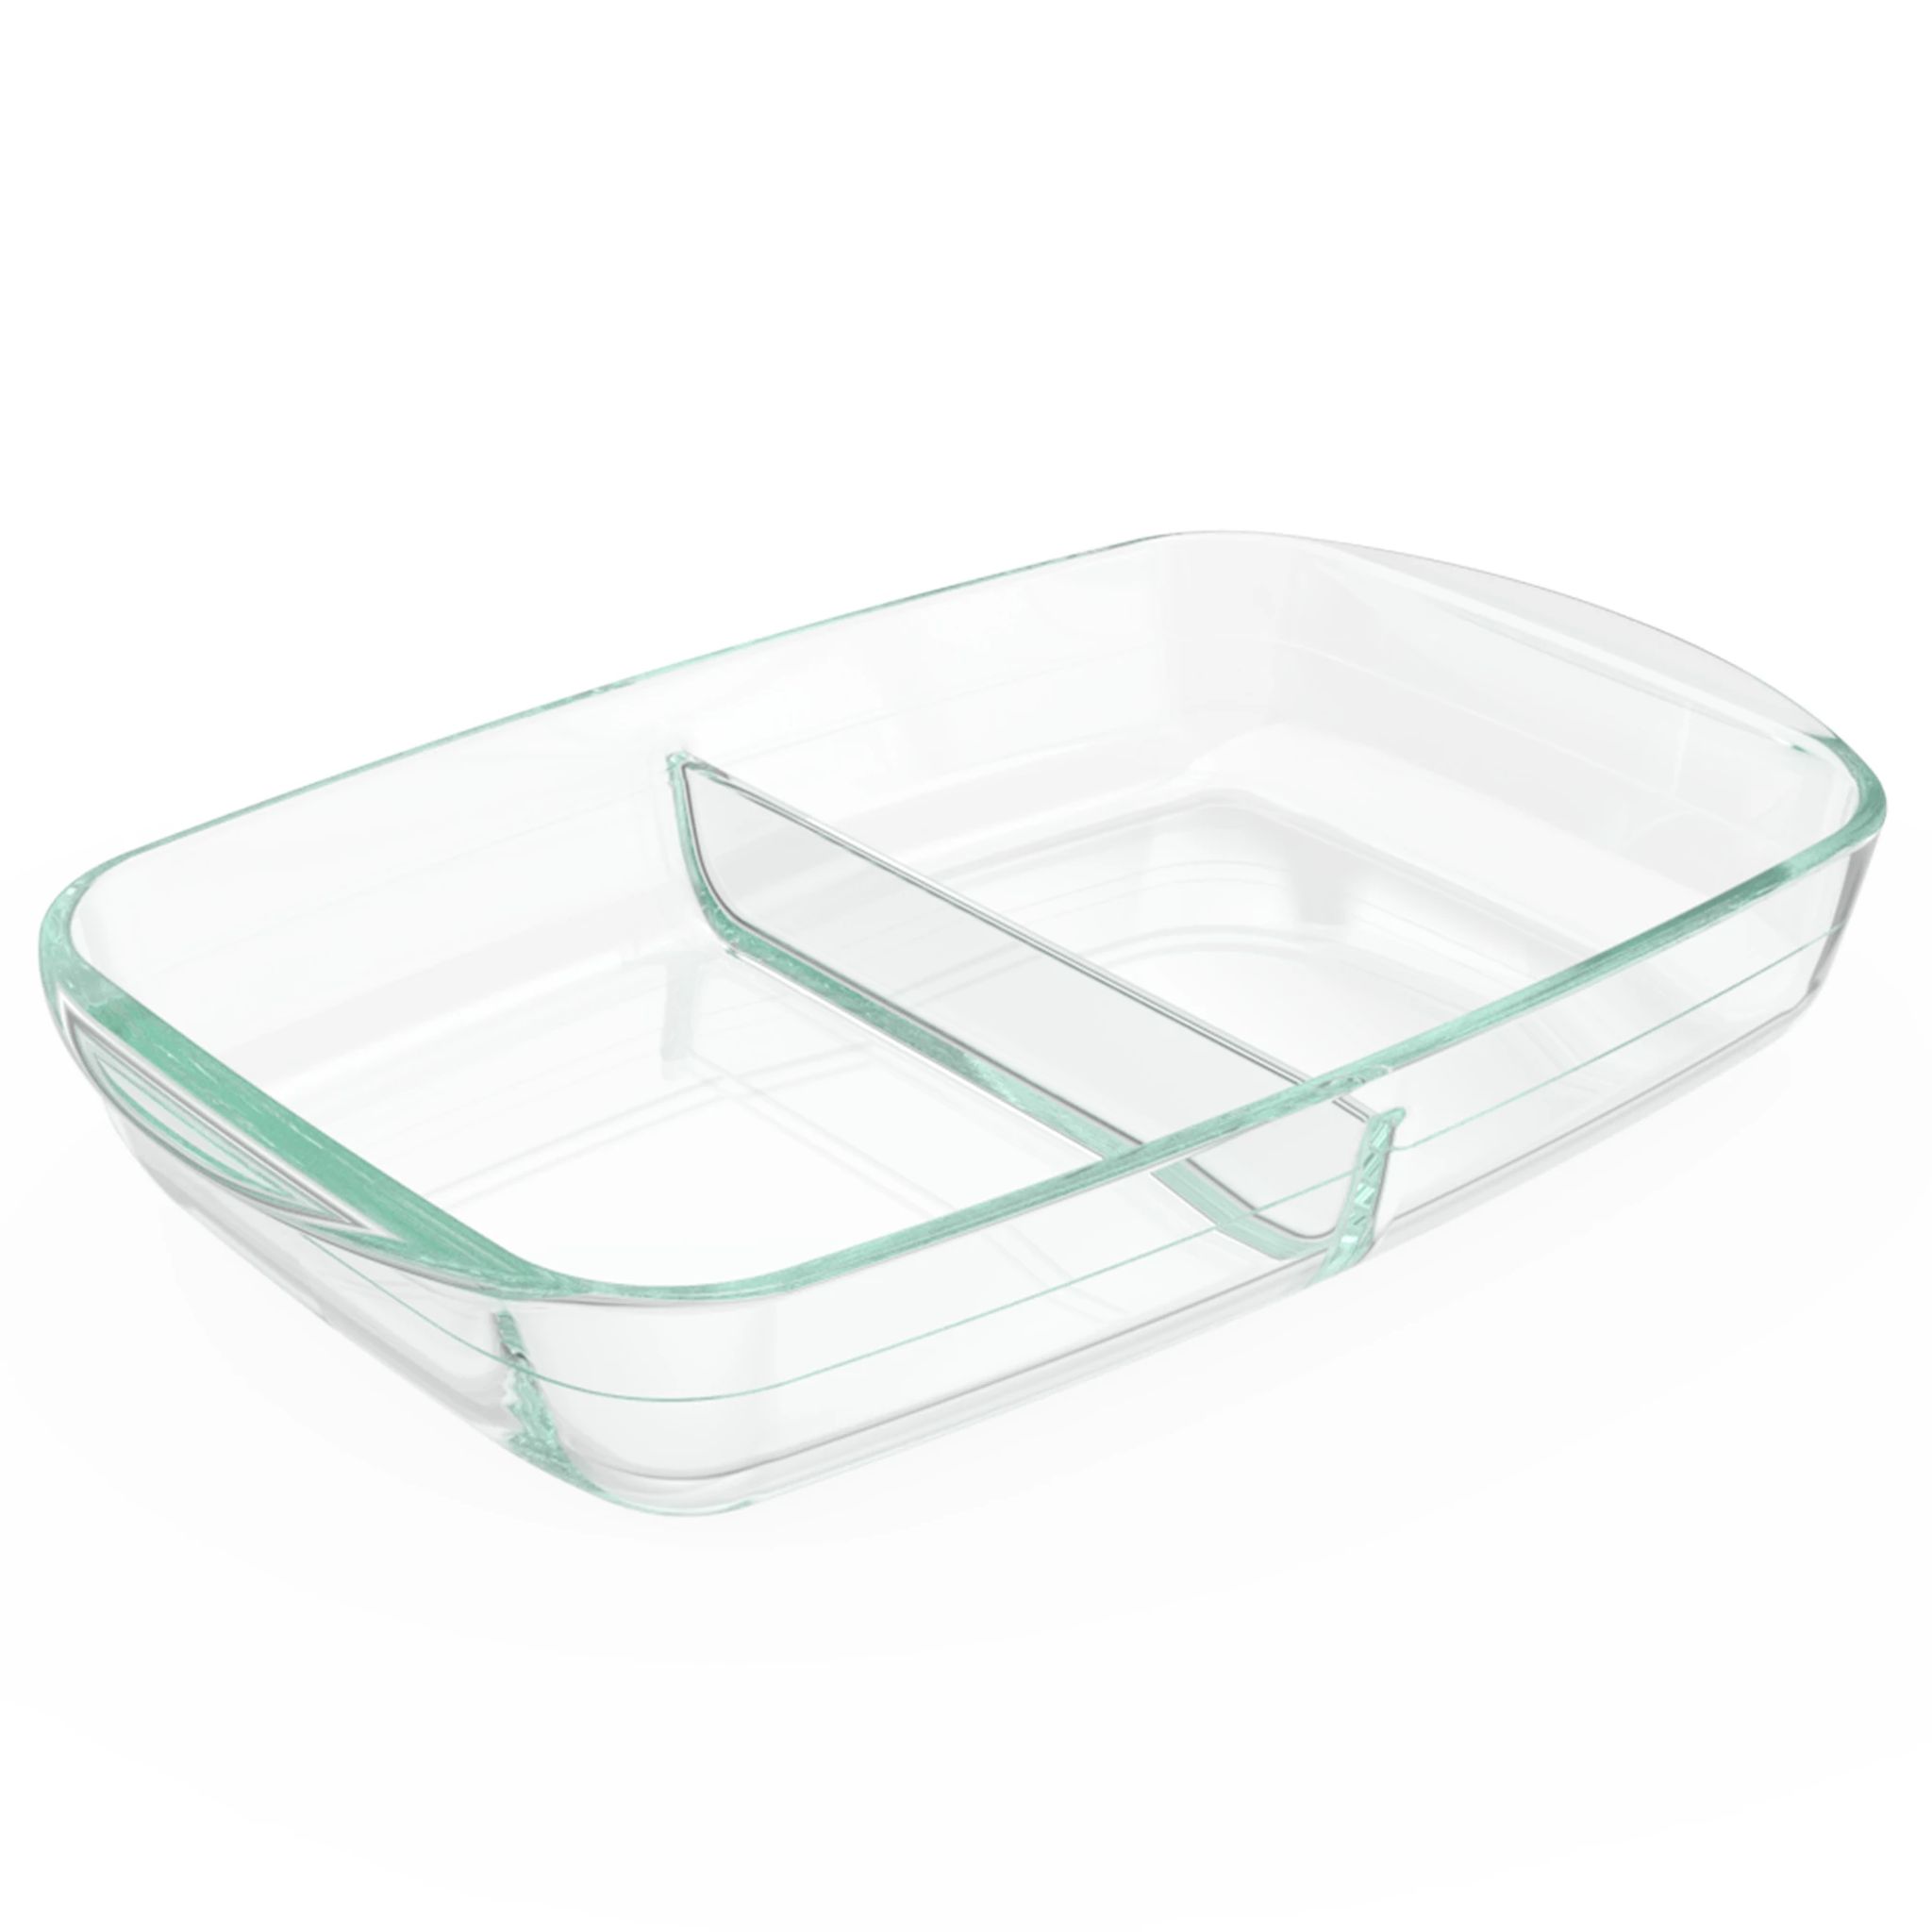 Glass Bakeware Sets - Liberty Tabletop - Bakeware Made in USA